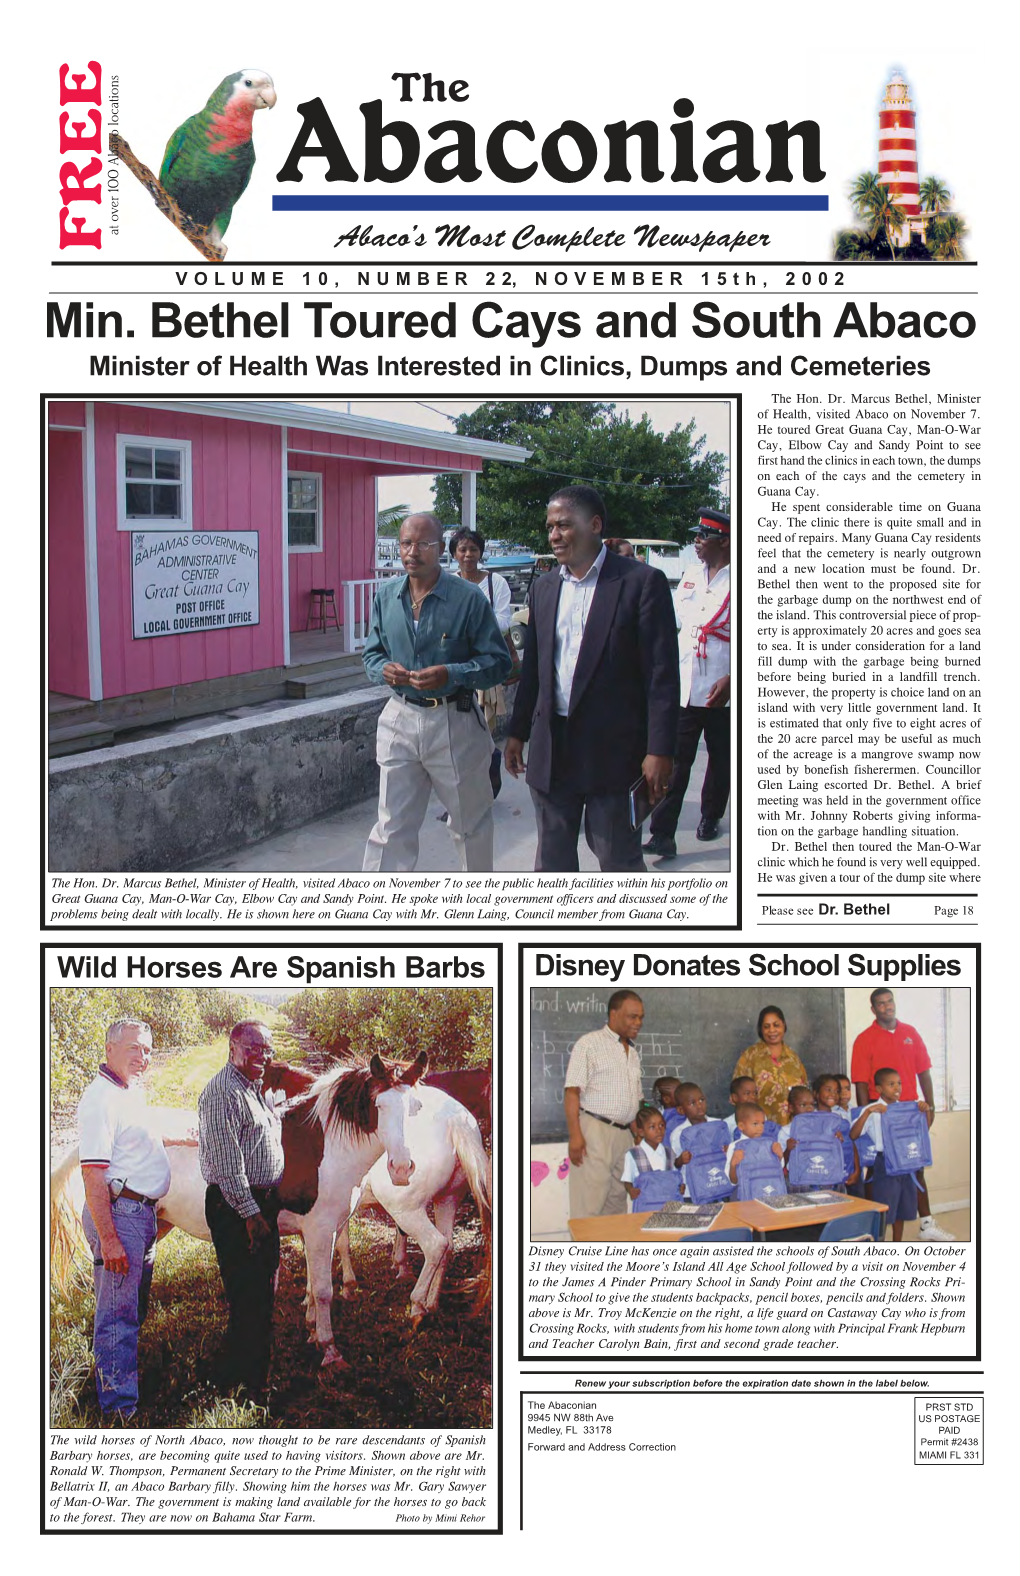 Min. Bethel Toured Cays and South Abaco Minister of Health Was Interested in Clinics, Dumps and Cemeteries the Hon